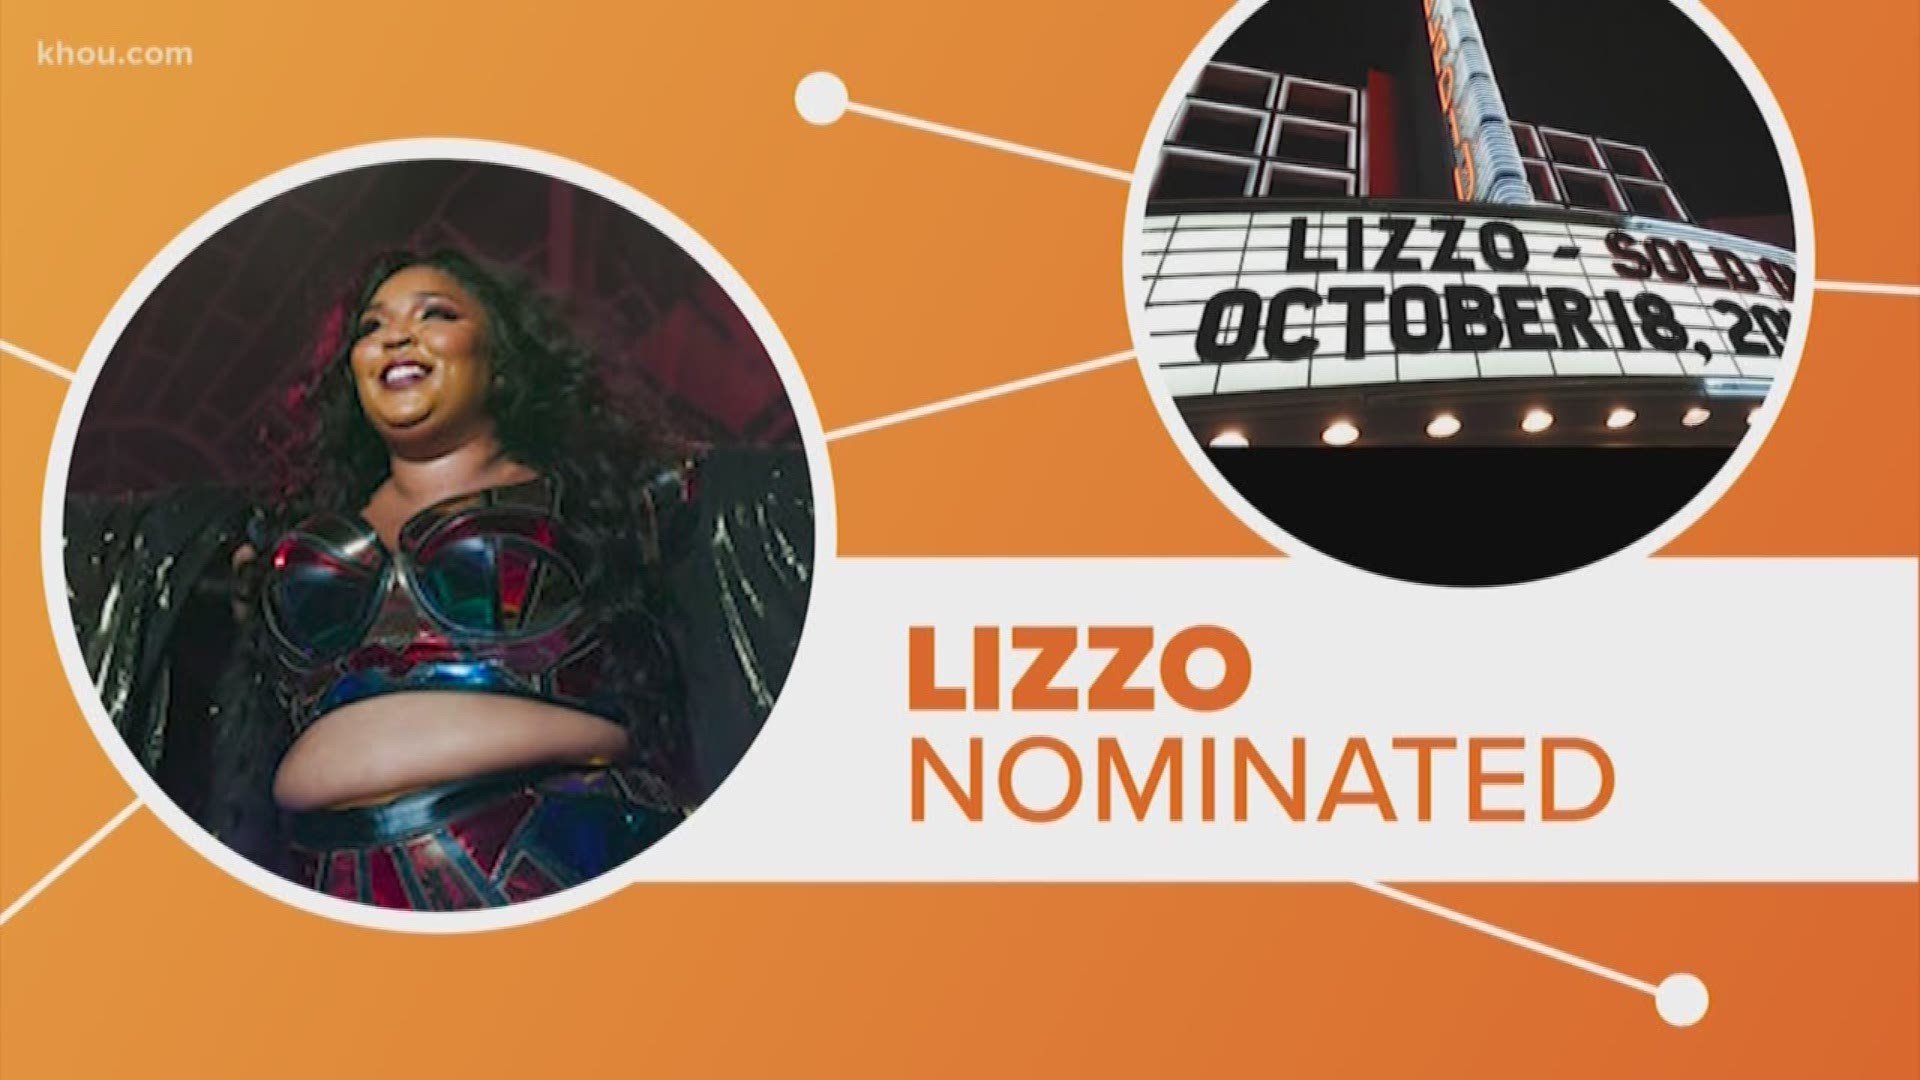 Lizzo just picked up 8 Grammy nominations, including "Best New Artist,” but many argue Lizzo isn't new at all. So how'd she get around the rules to get nominated?